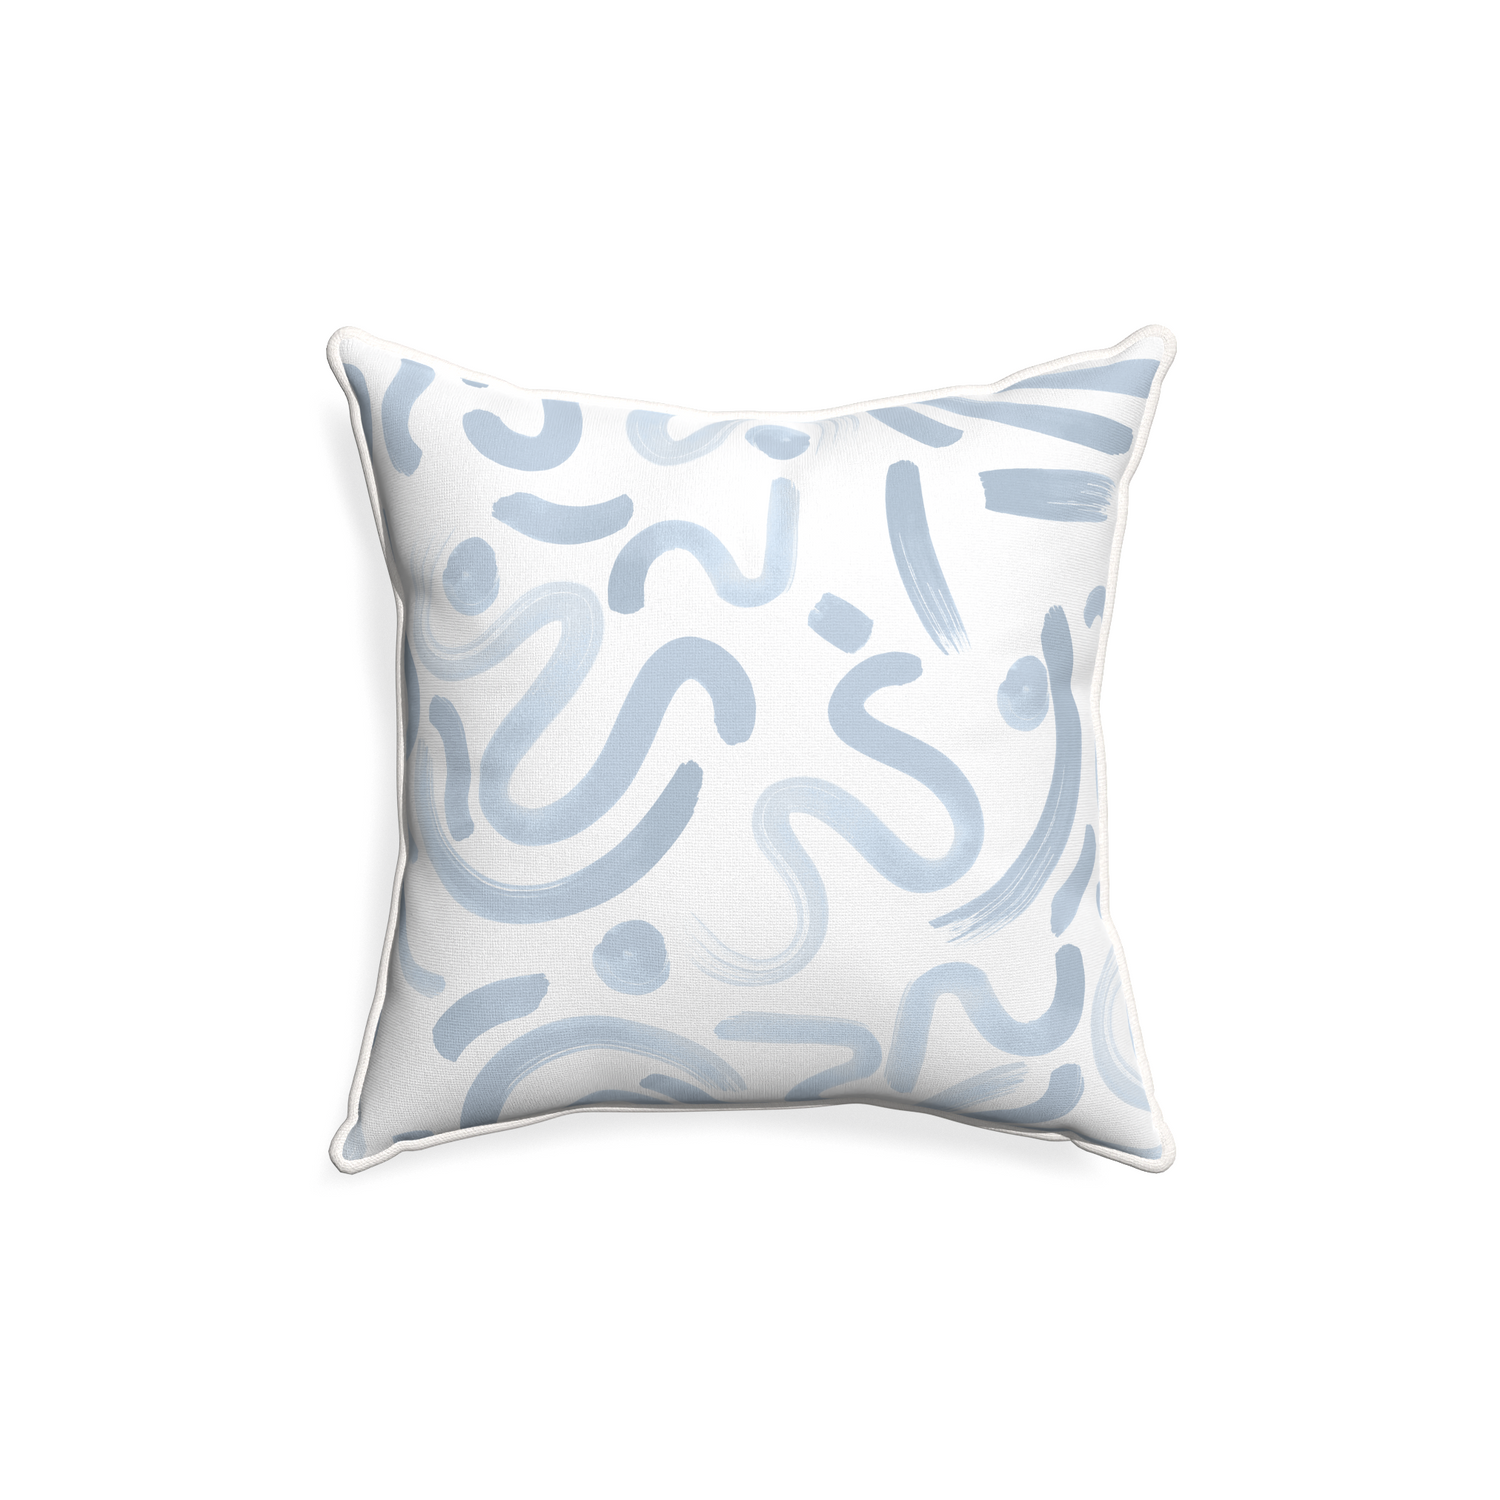 18-square hockney sky custom pillow with snow piping on white background